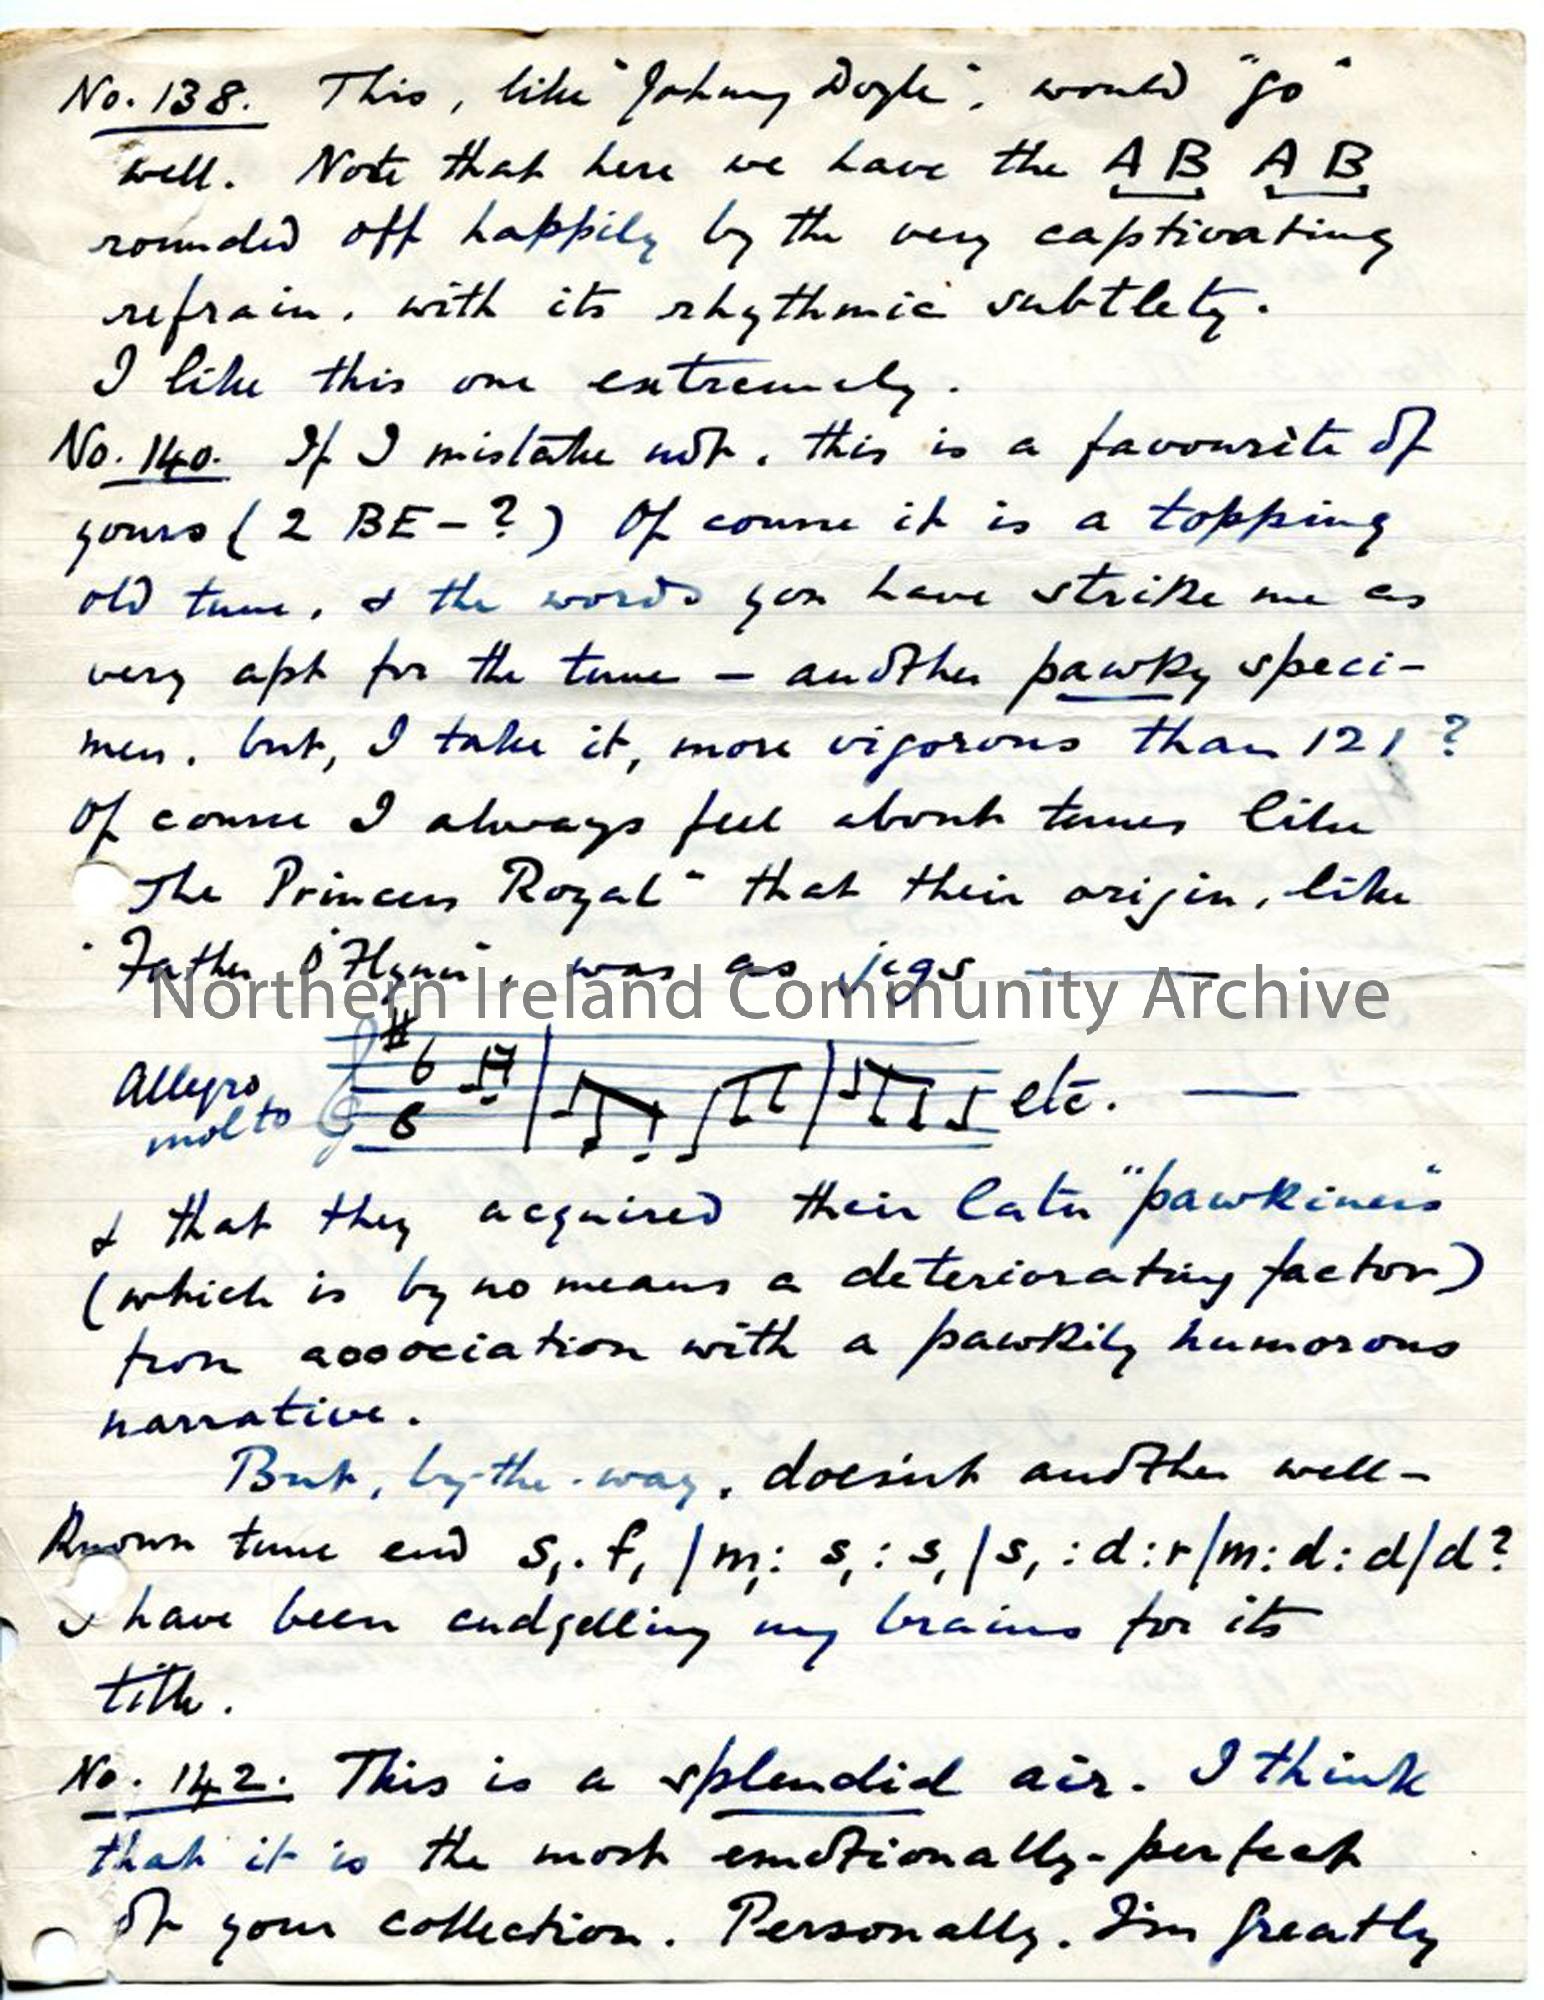 Page 7 of 12, letter from Norman Hay, 1.2.1927